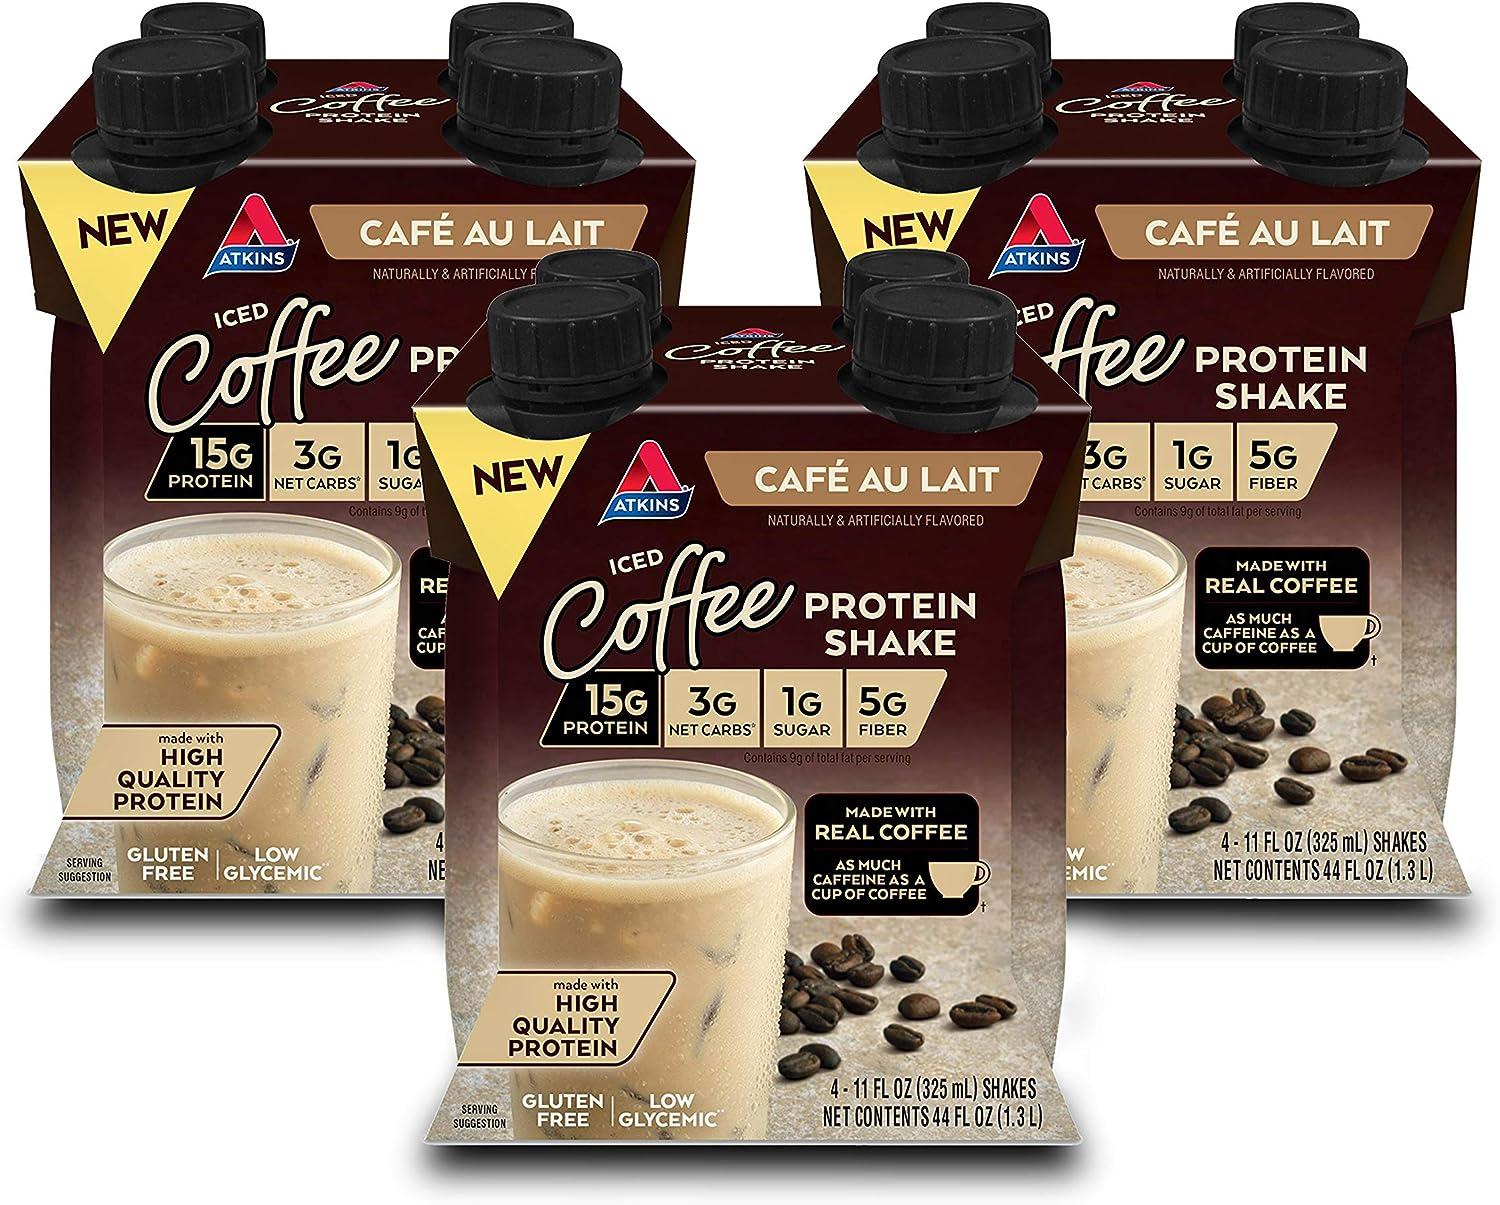 Atkins Iced Coffee Protein Shake 12 Pack for $13.26